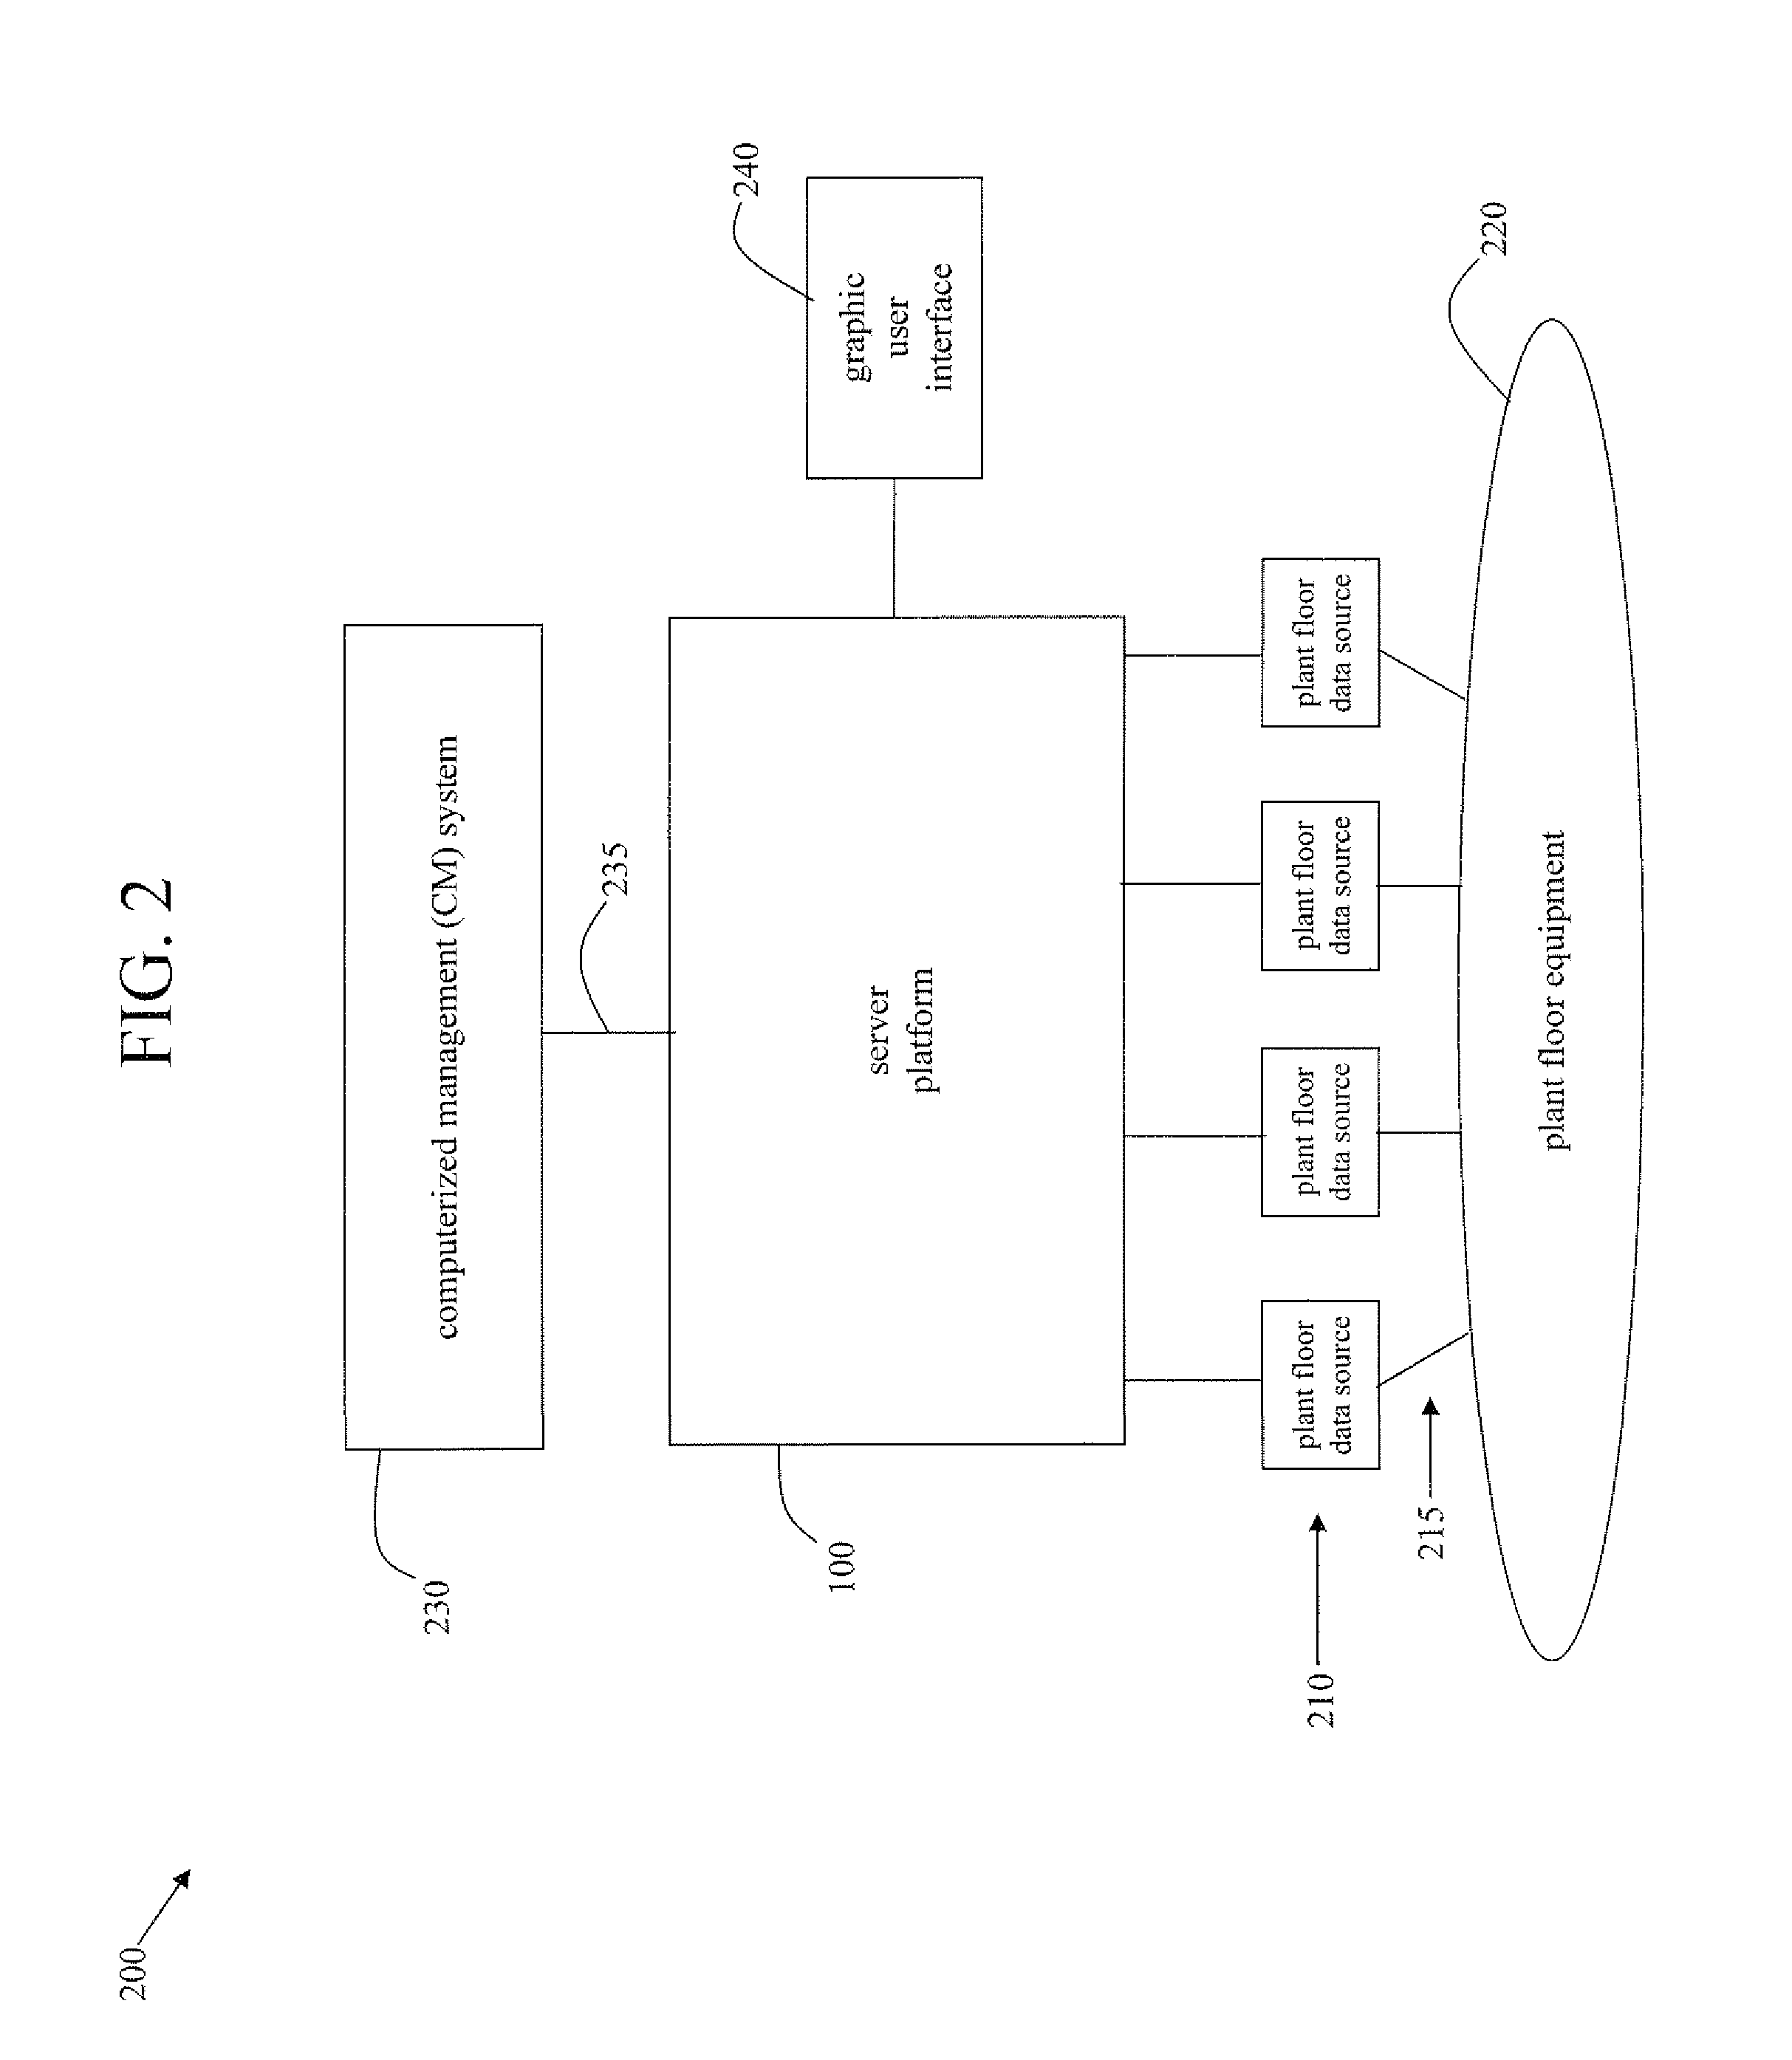 System and methods for the universal integration of plant floor assets and a computerized management system